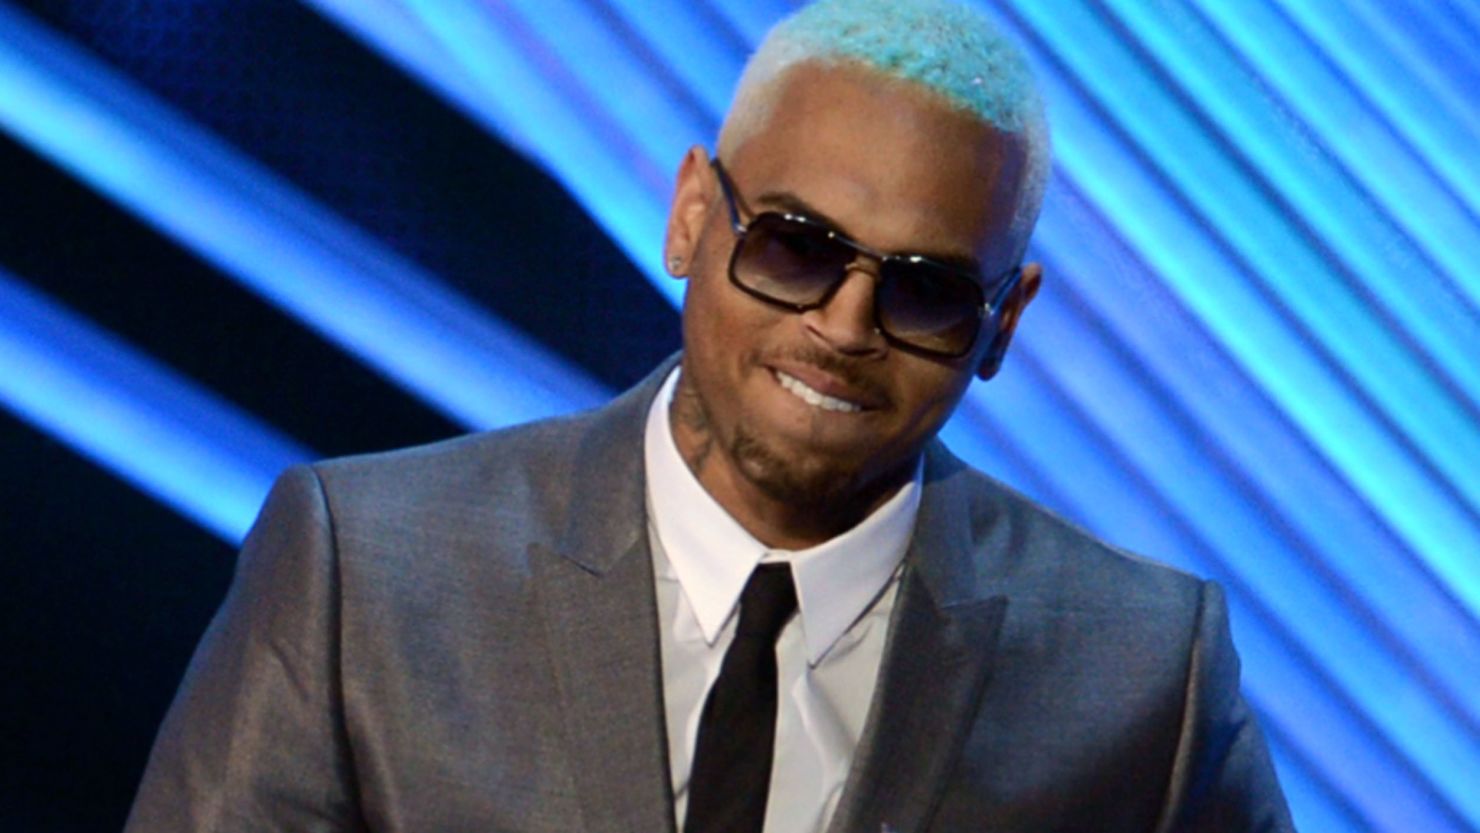  Singer Chris Brown will have a probation violation hearing on Novermber 1 after he tested positive for marijuana use.